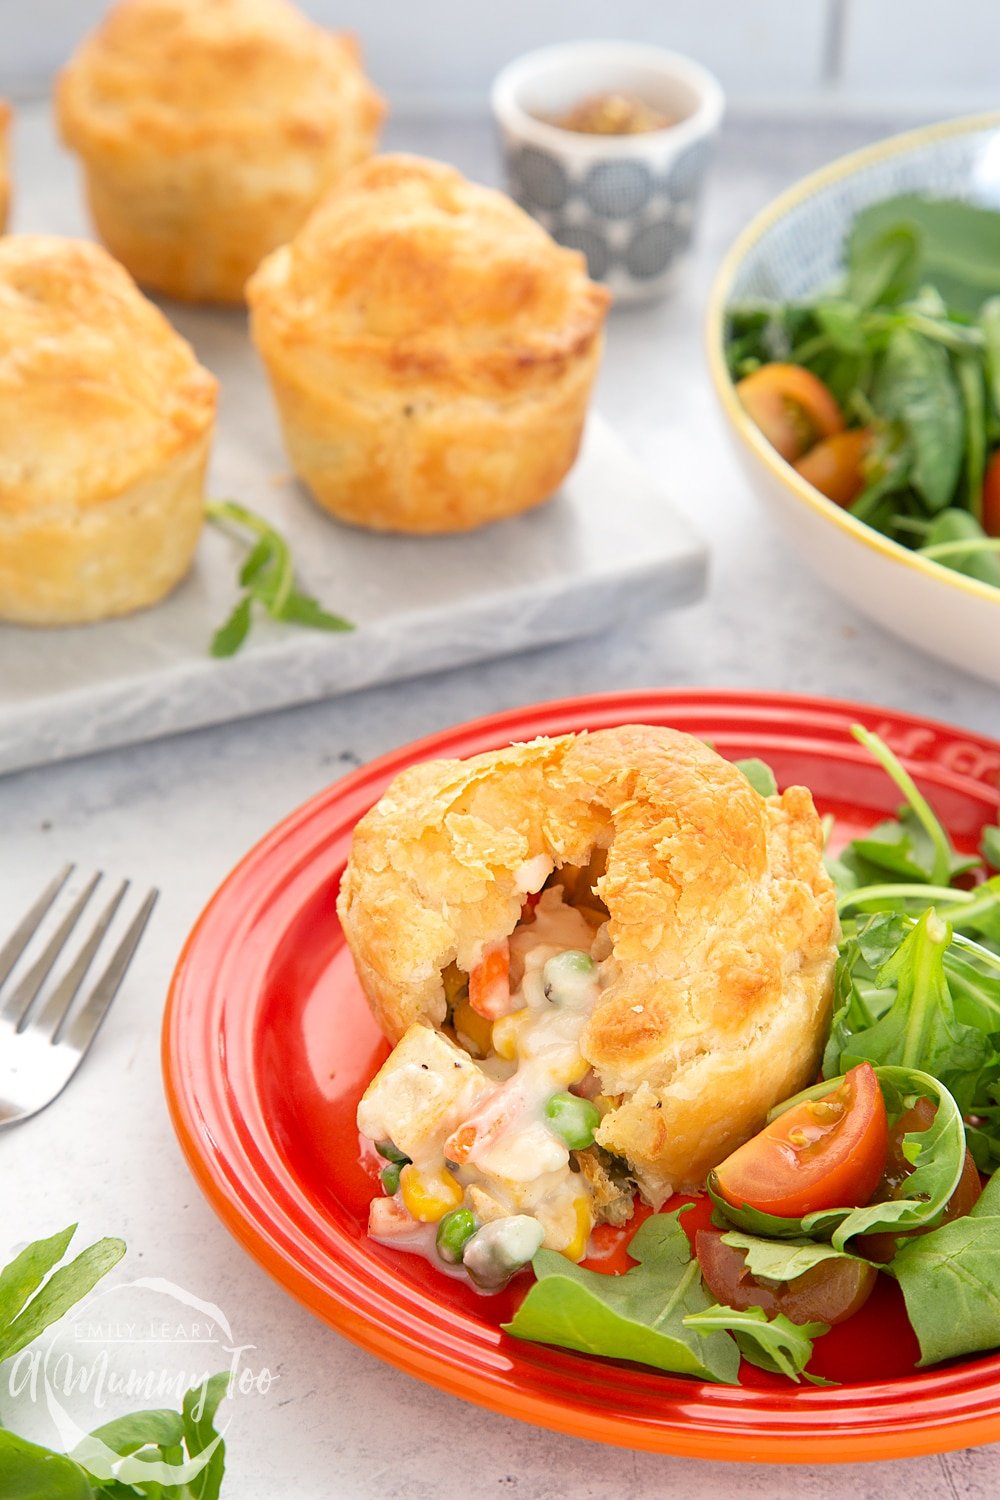 Creamy tofu and vegetable vegan mini pies served on a plate with salad